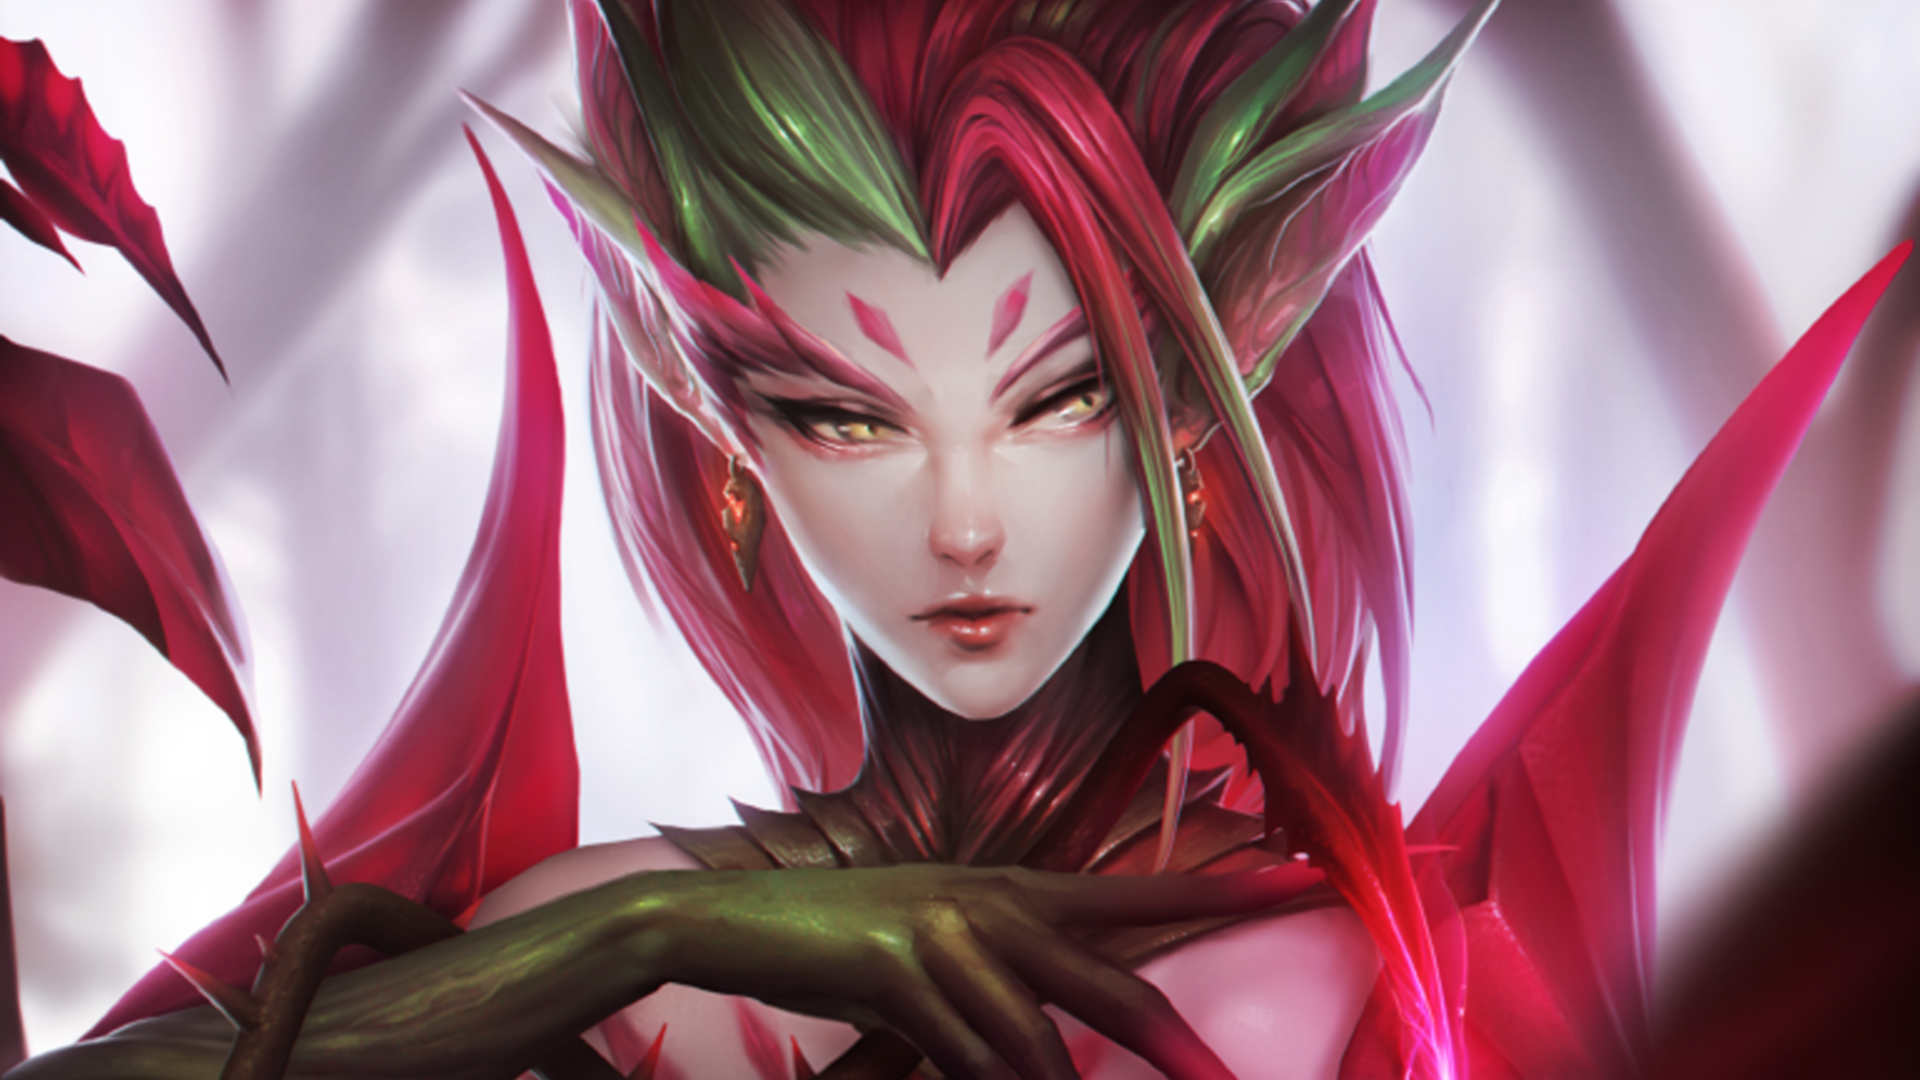 League Of Legends Zyra Fantasy Girl Redhead PC Gaming 1920x1080